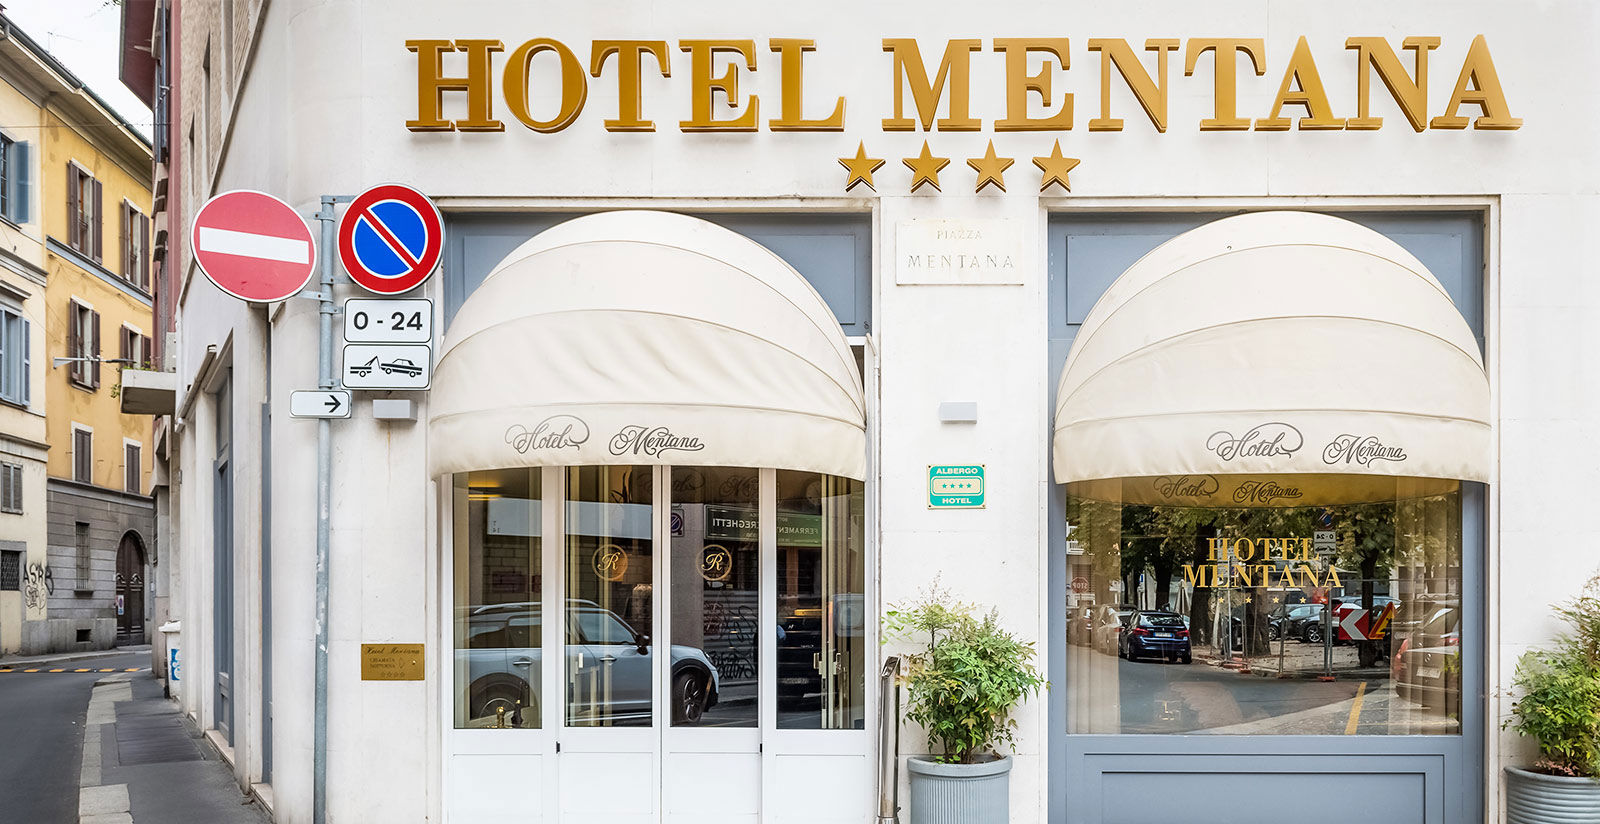 Hotel Mentana - 4 star hotel for corporate events in central Milan 4